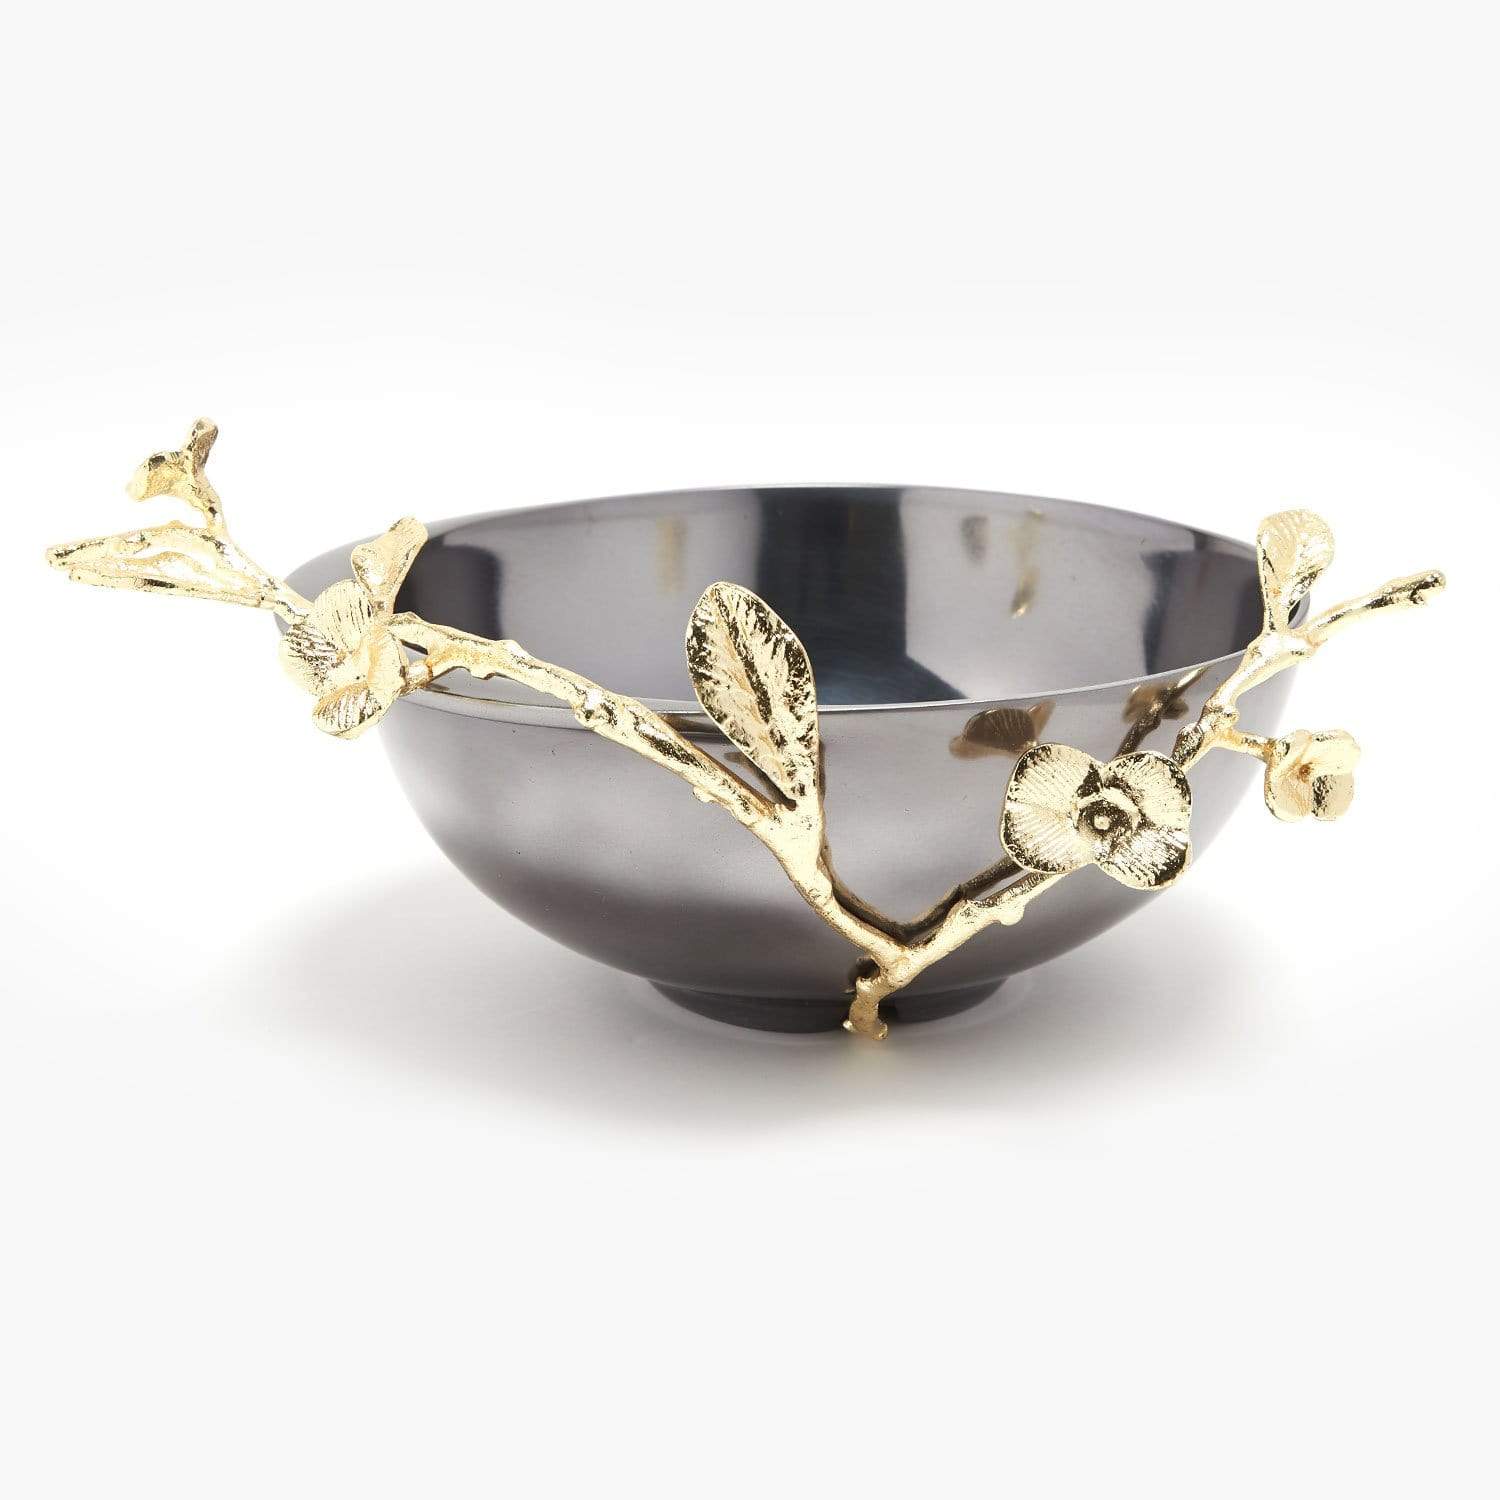 ALEXANDER MILLIE BOWL SMALL GOLD FINISHED BRASS & BLACK NICKEL PLATED ALUM - 617039